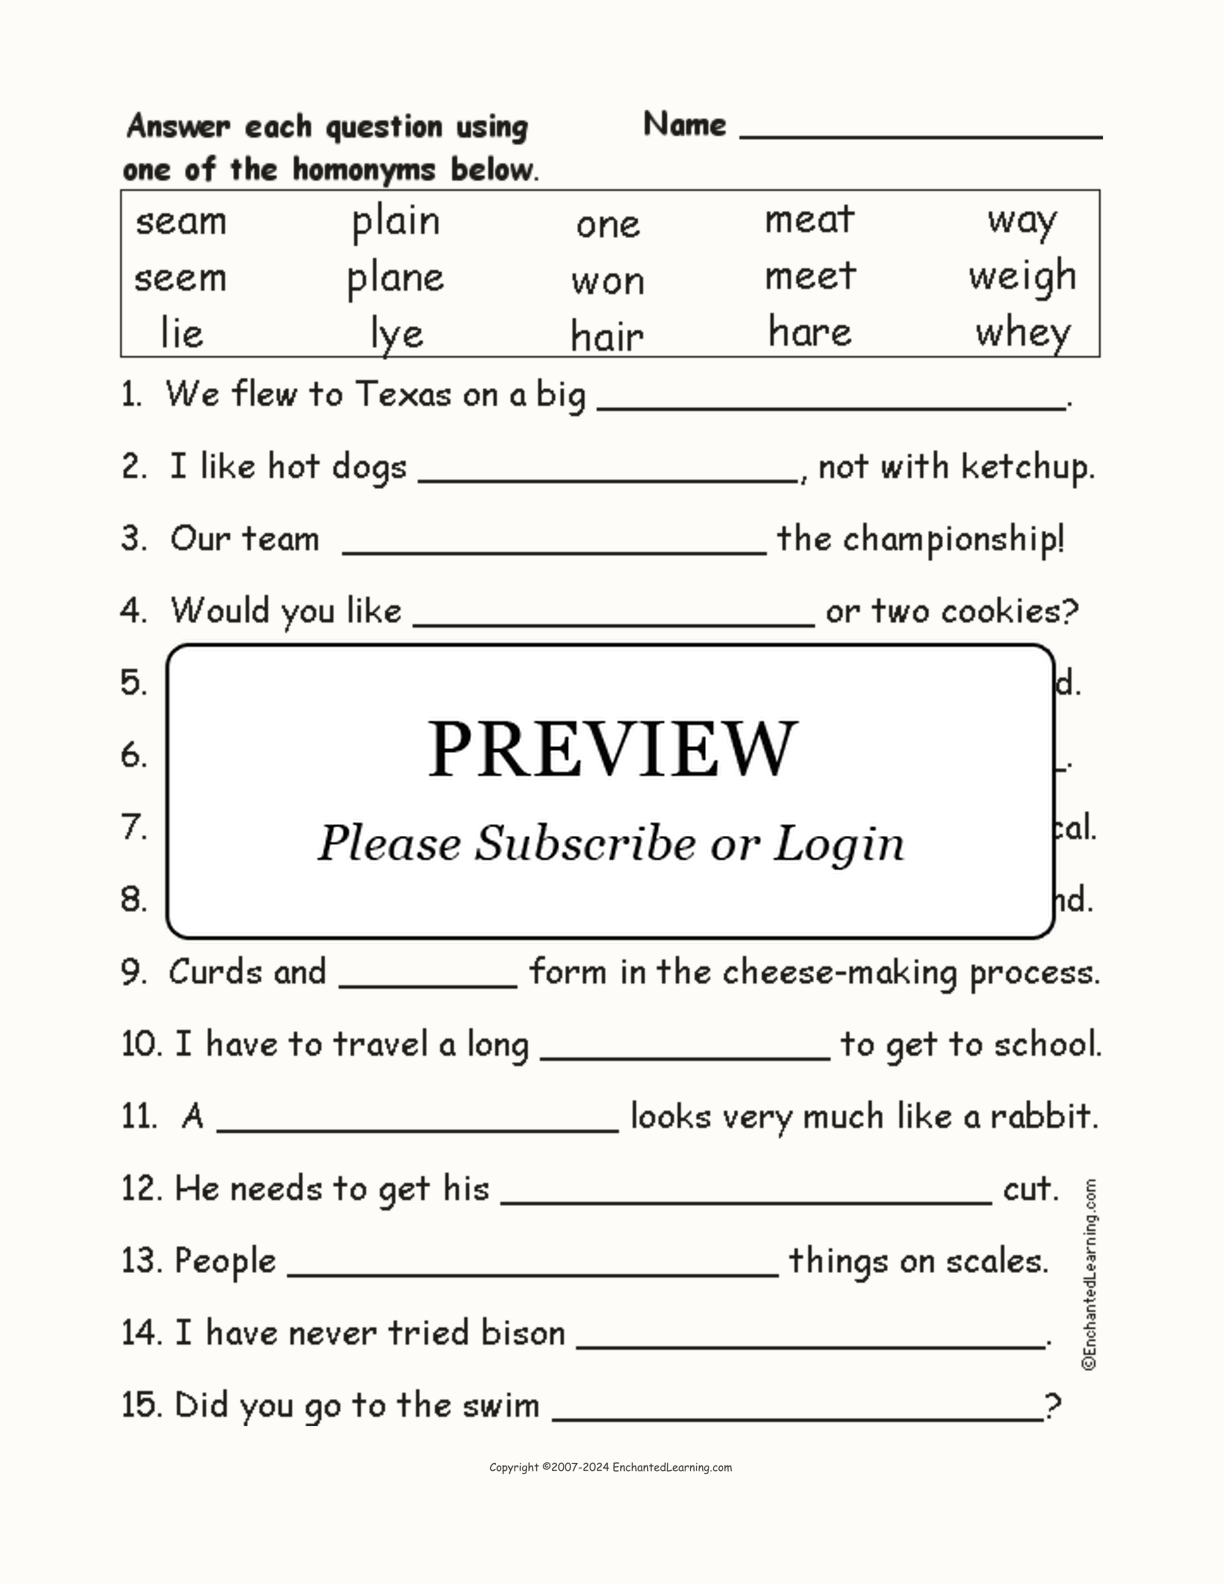 Homonyms Spelling Word Questions #6 interactive worksheet page 1